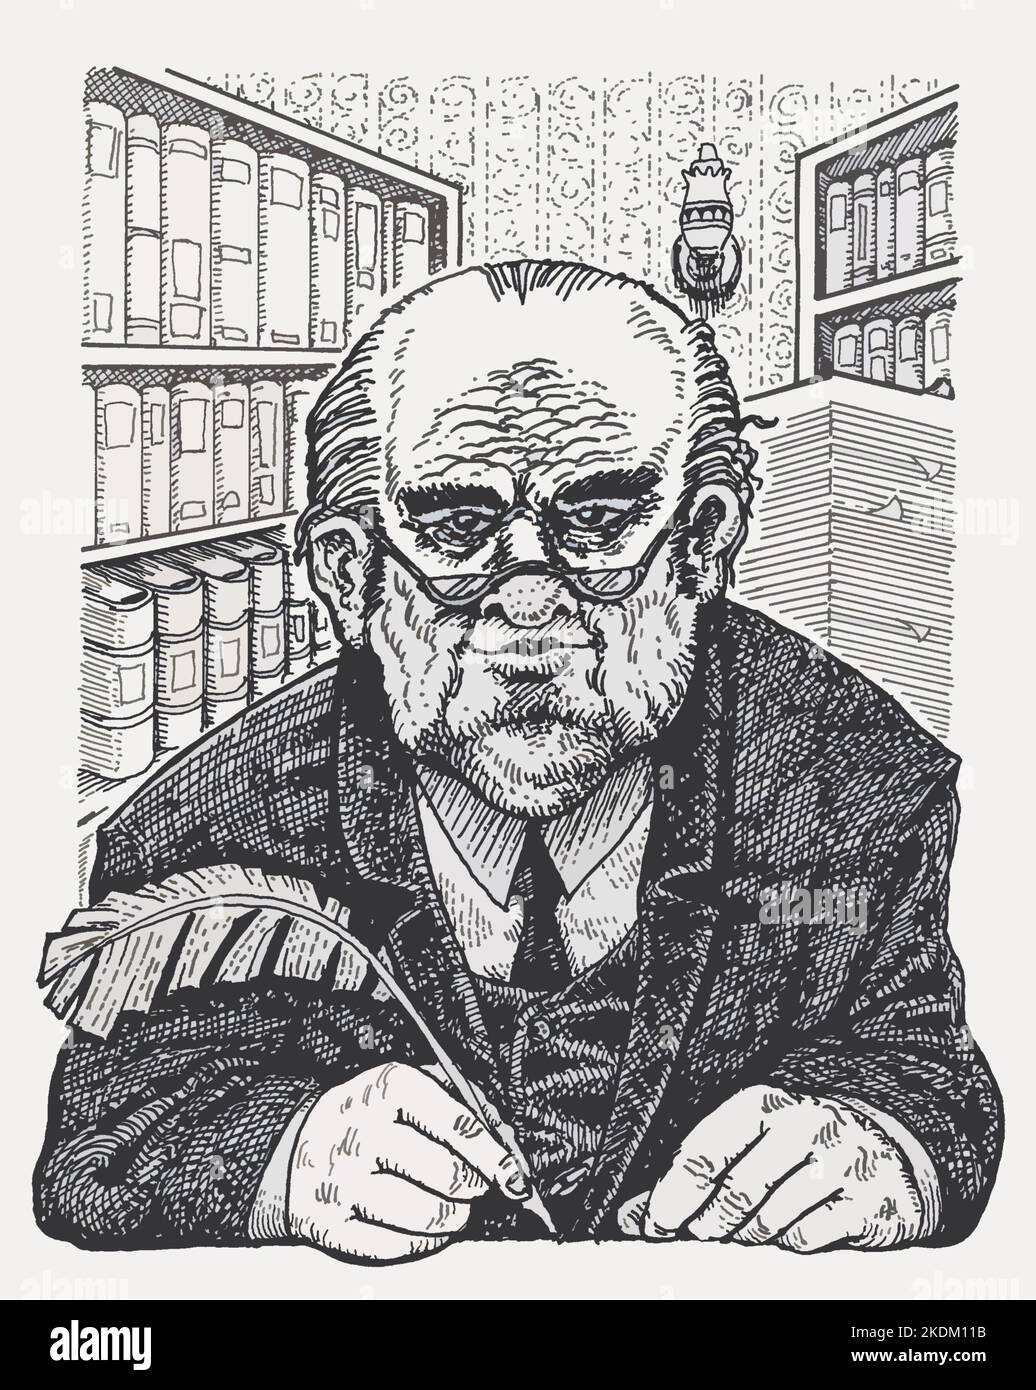 Black and white pen & ink drawing of mature solicitor in his chambers, writing with a quill pen, art inspired by Dickens' Tulkinghorn from Bleak House Stock Photo